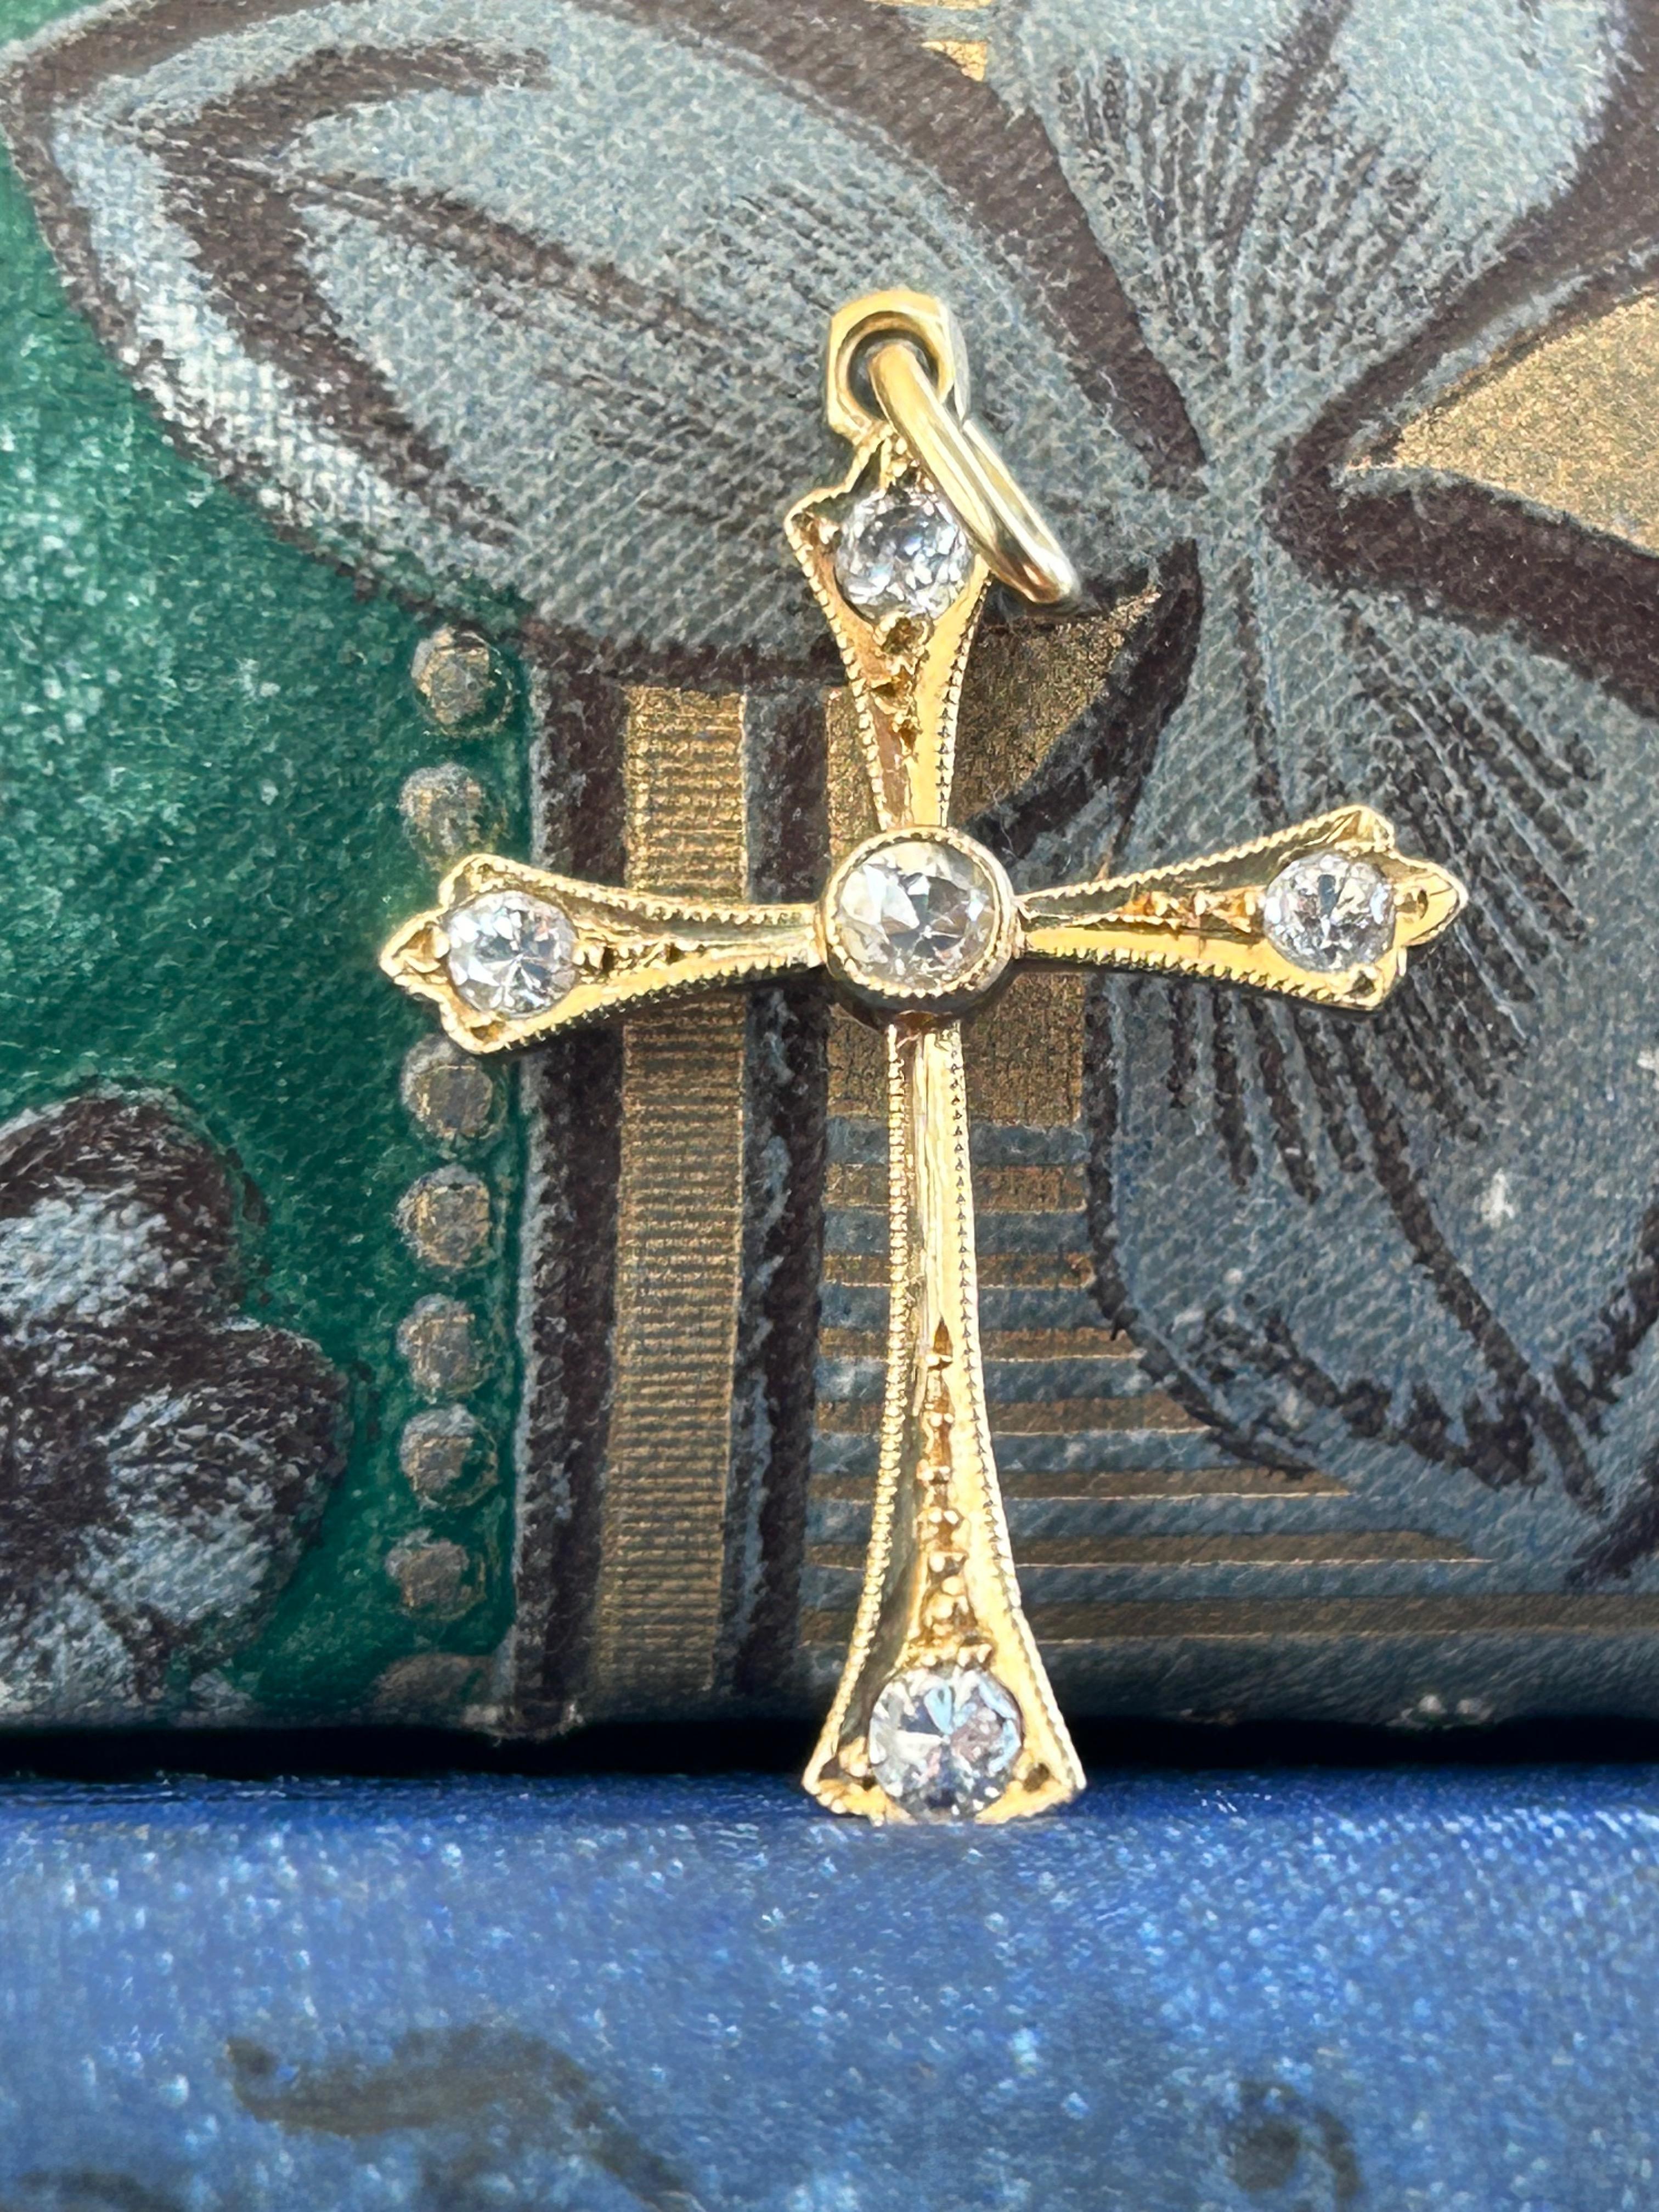 A lovely cross pendant from the Edwardian Period ( CA 1910s).  This wonderful piece is crafted in 18 karat, yellow gold and forms the shape of an ornate cross. The body of the cross is adorned with five old European cut diamonds bezel set.
The